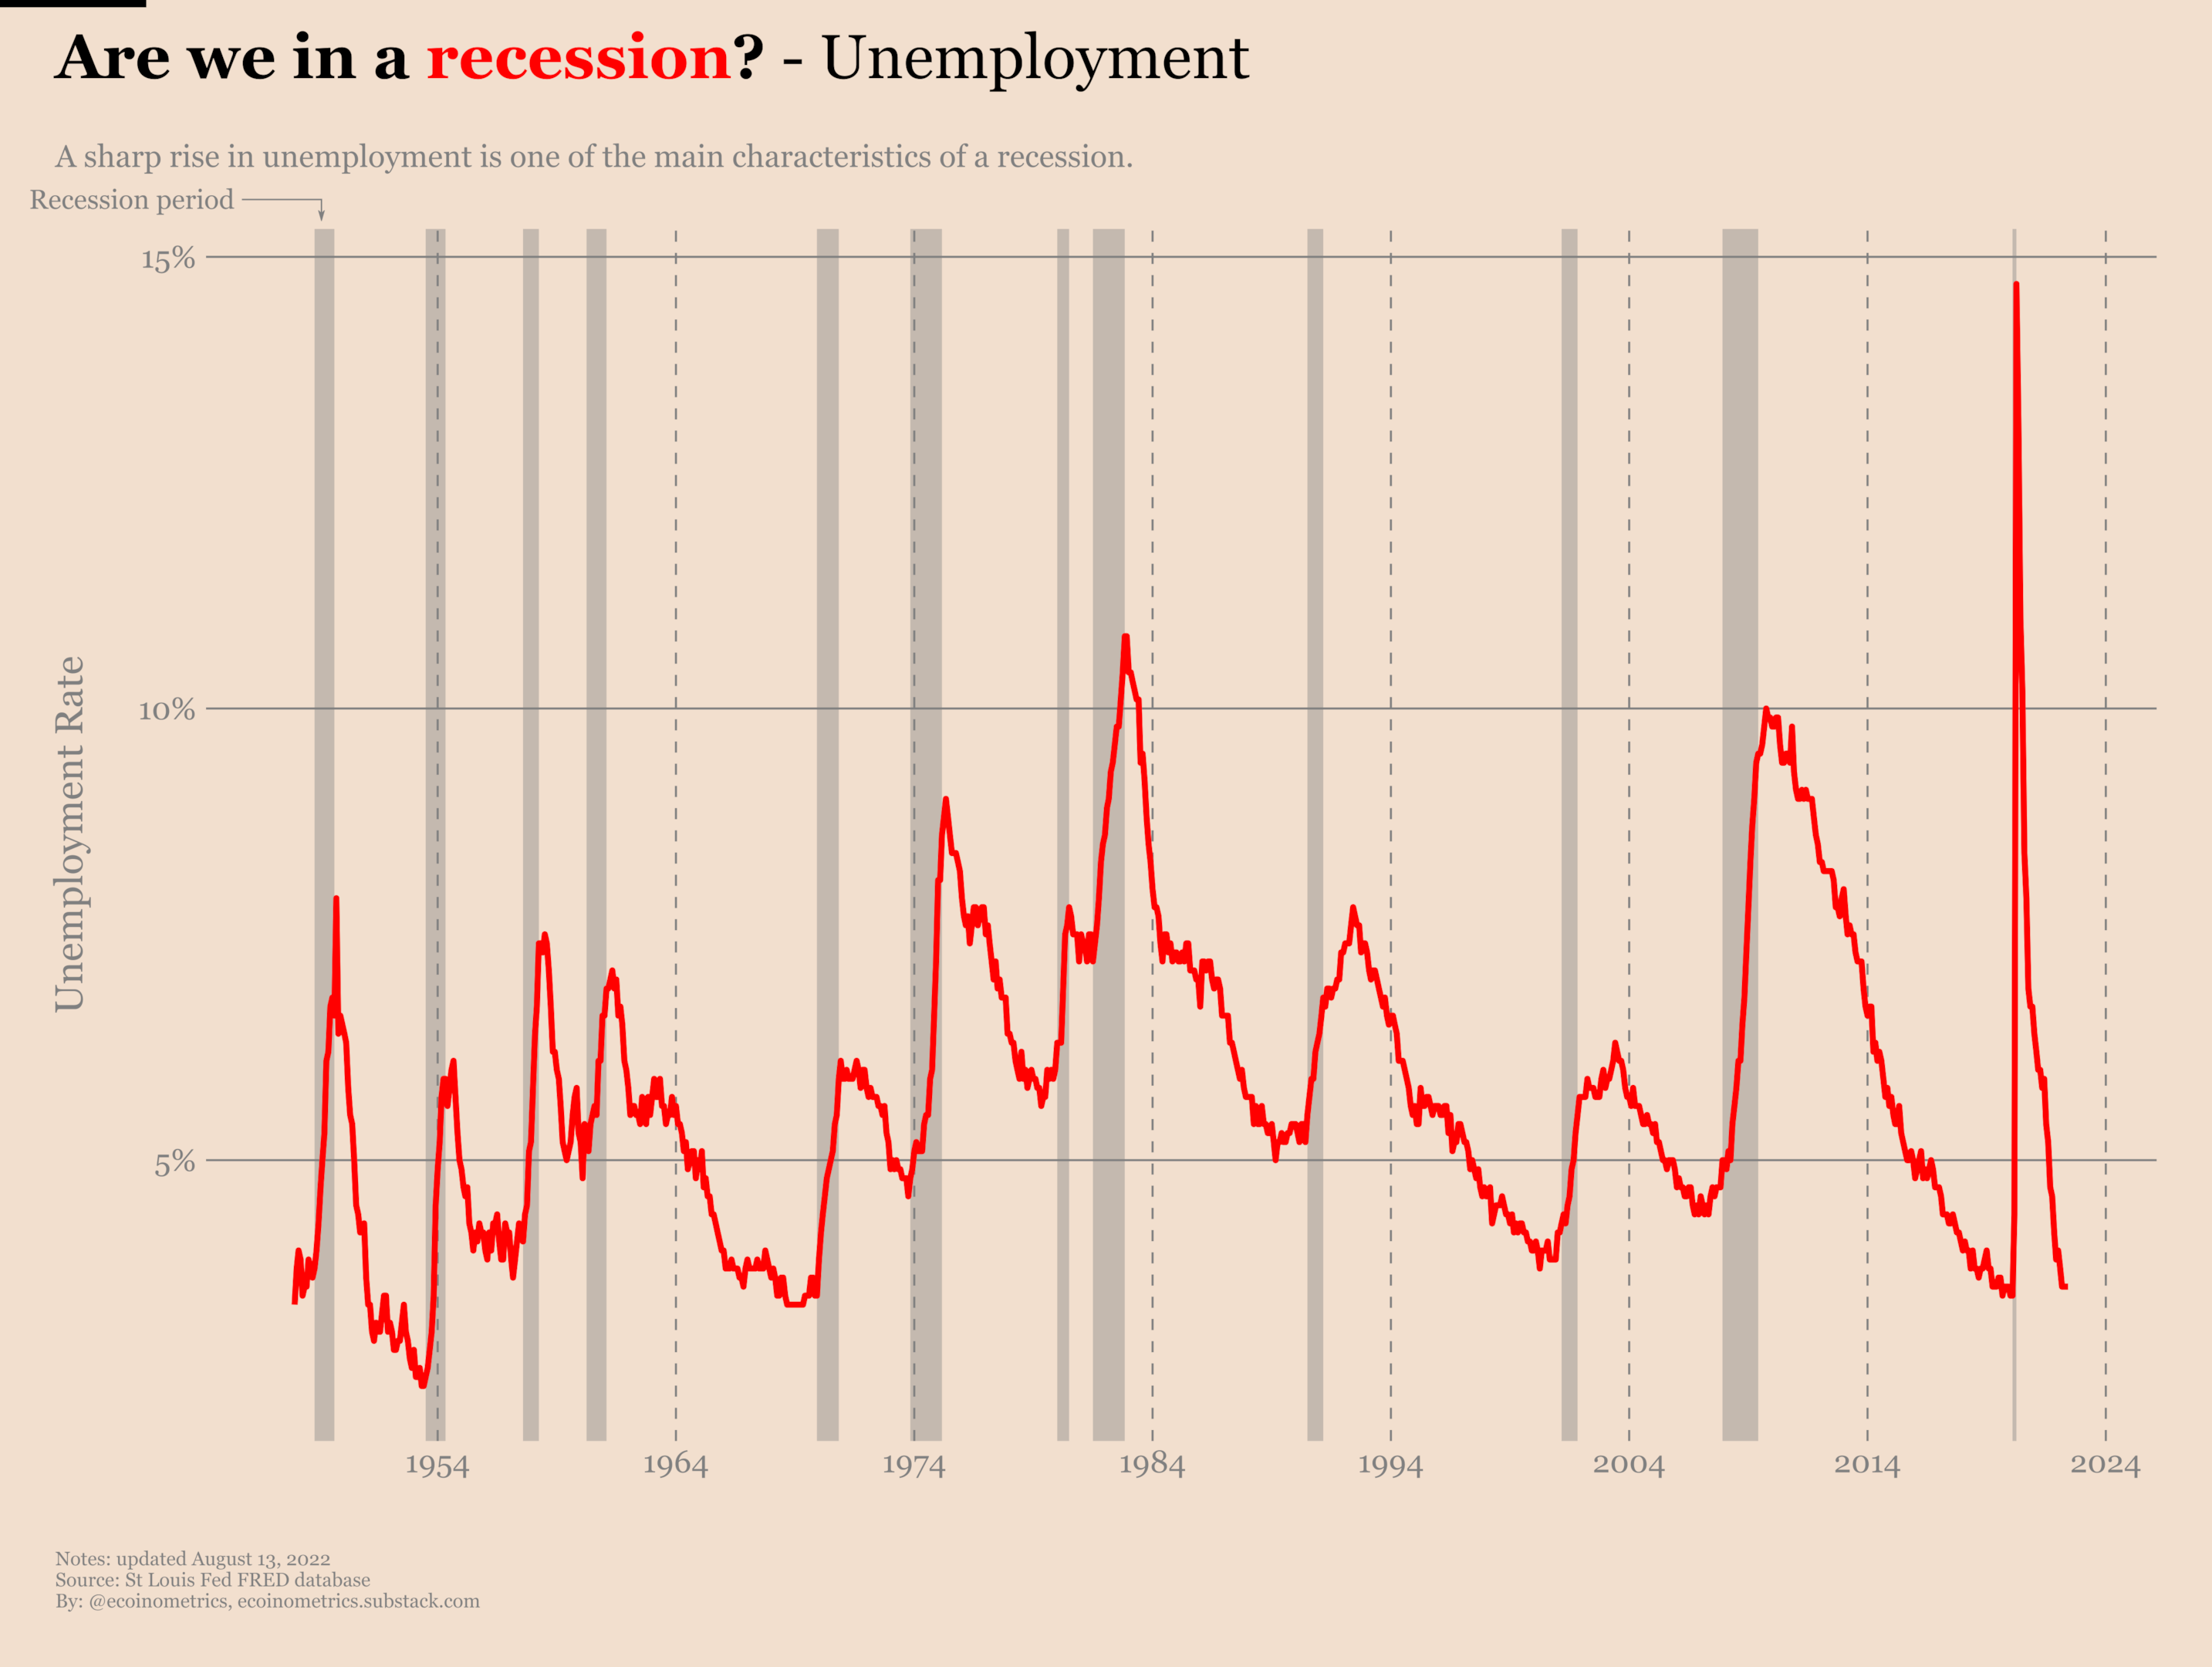 Evolution of the unemployment rate with highlighted recession periods.